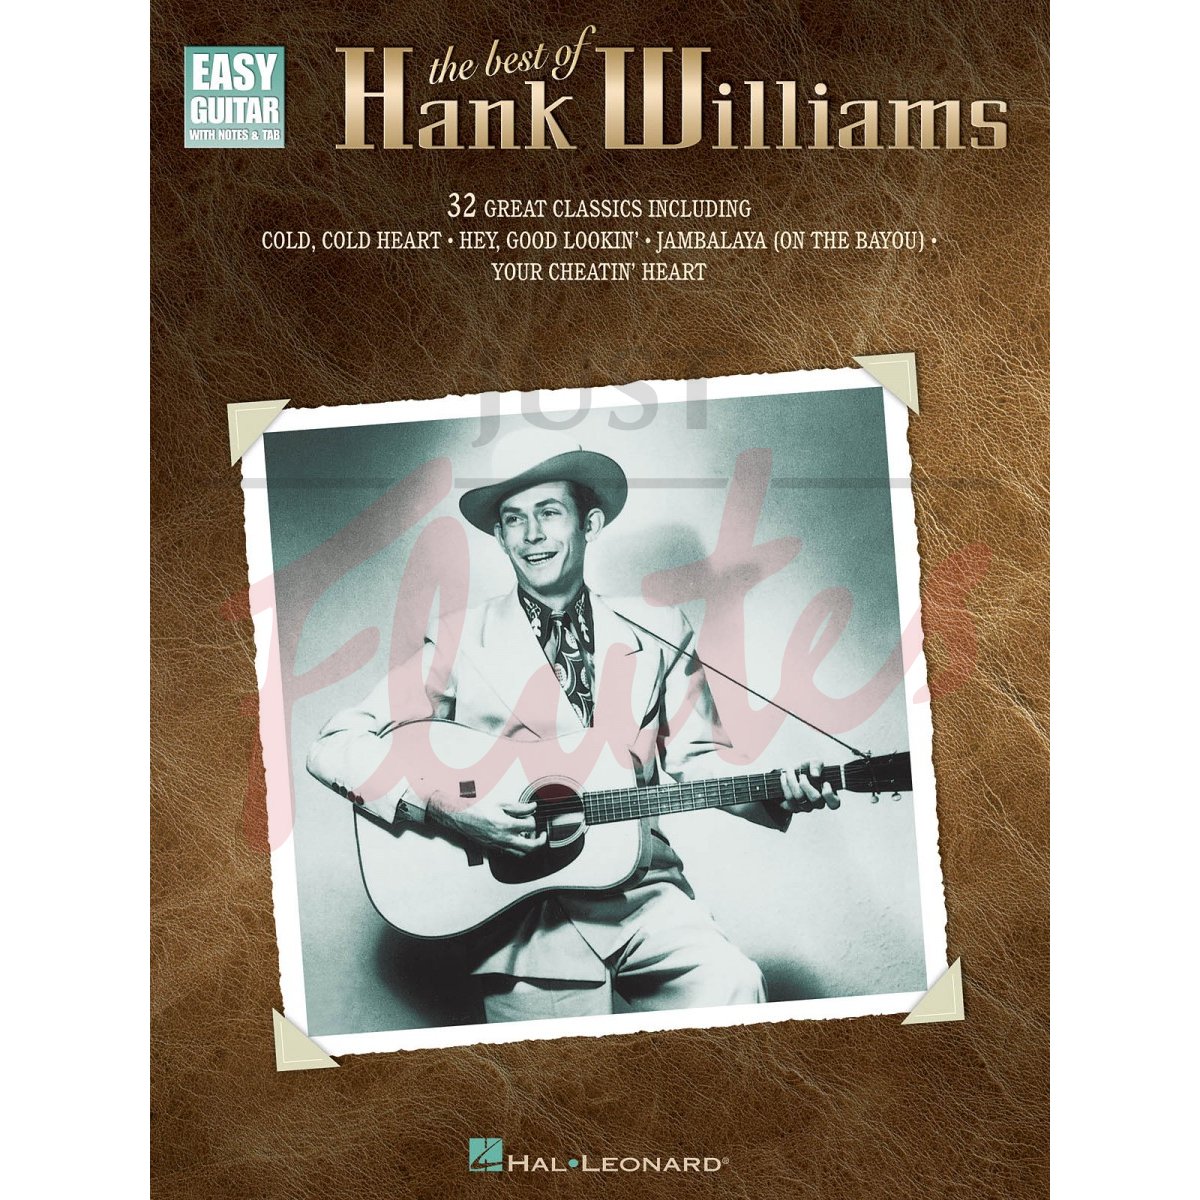 The Best of Hank Williams [Easy Guitar]